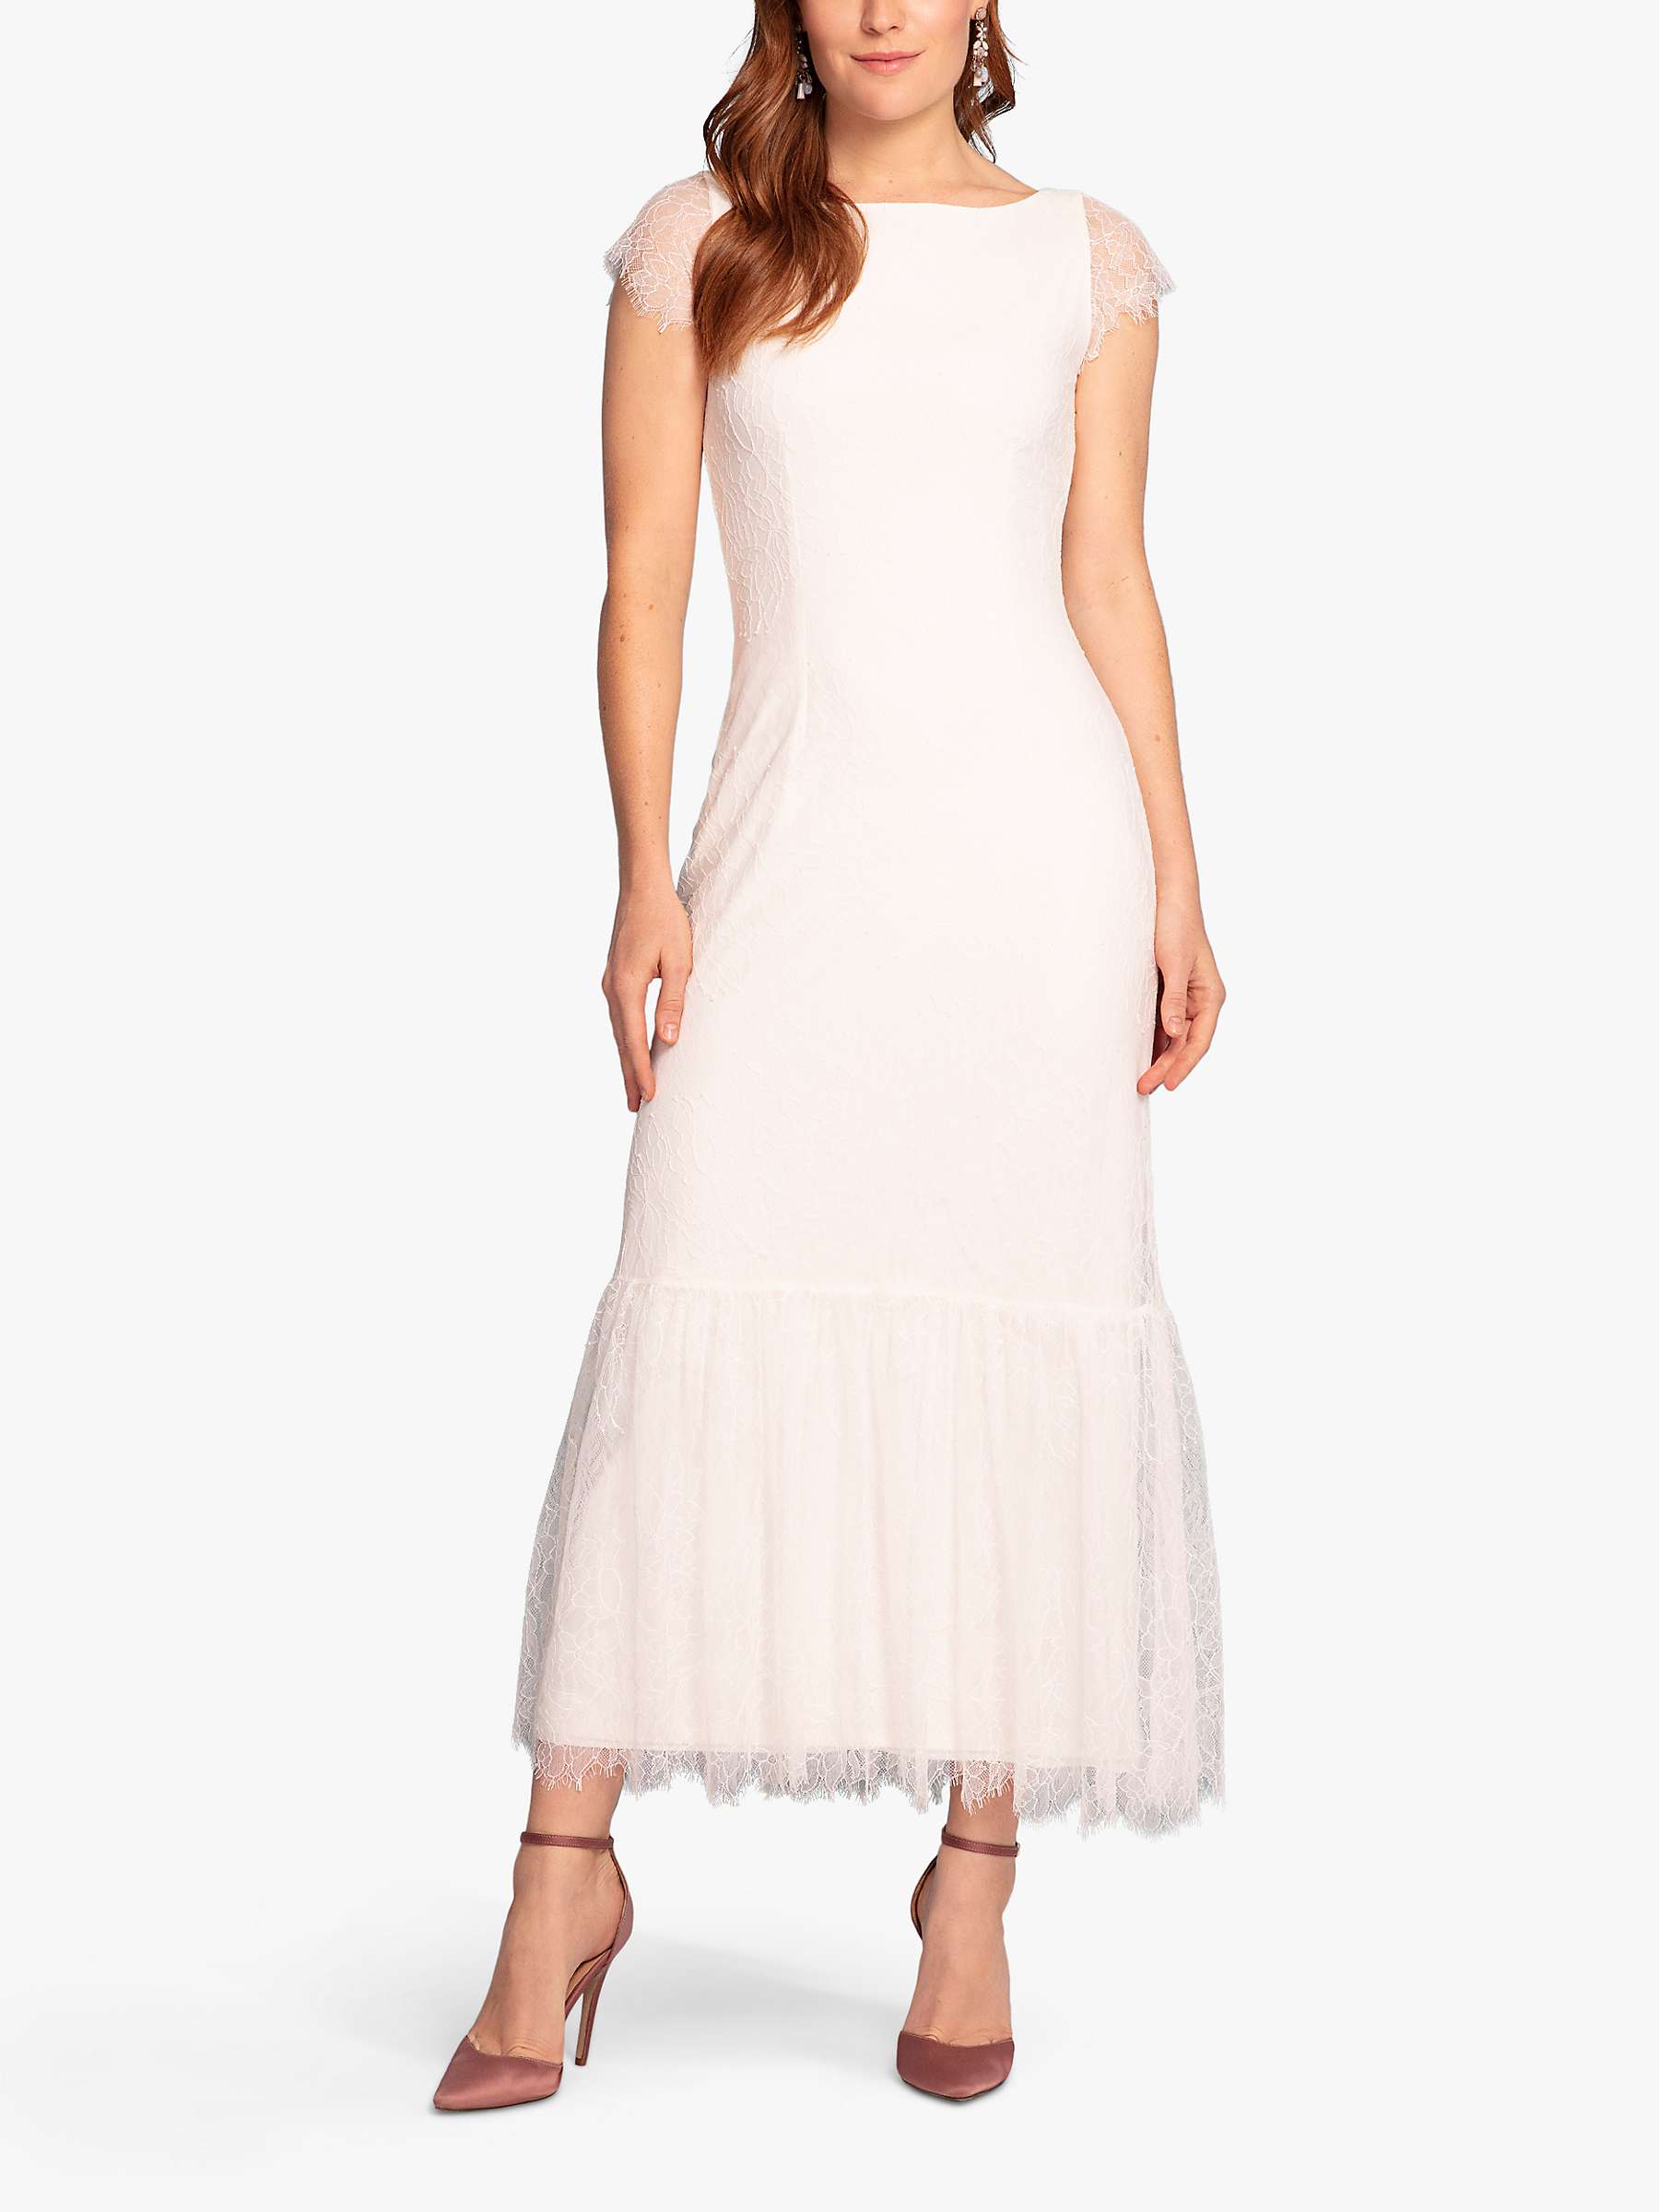 Buy Alie Street Beatrice Lace Dress, Ivory White Online at johnlewis.com